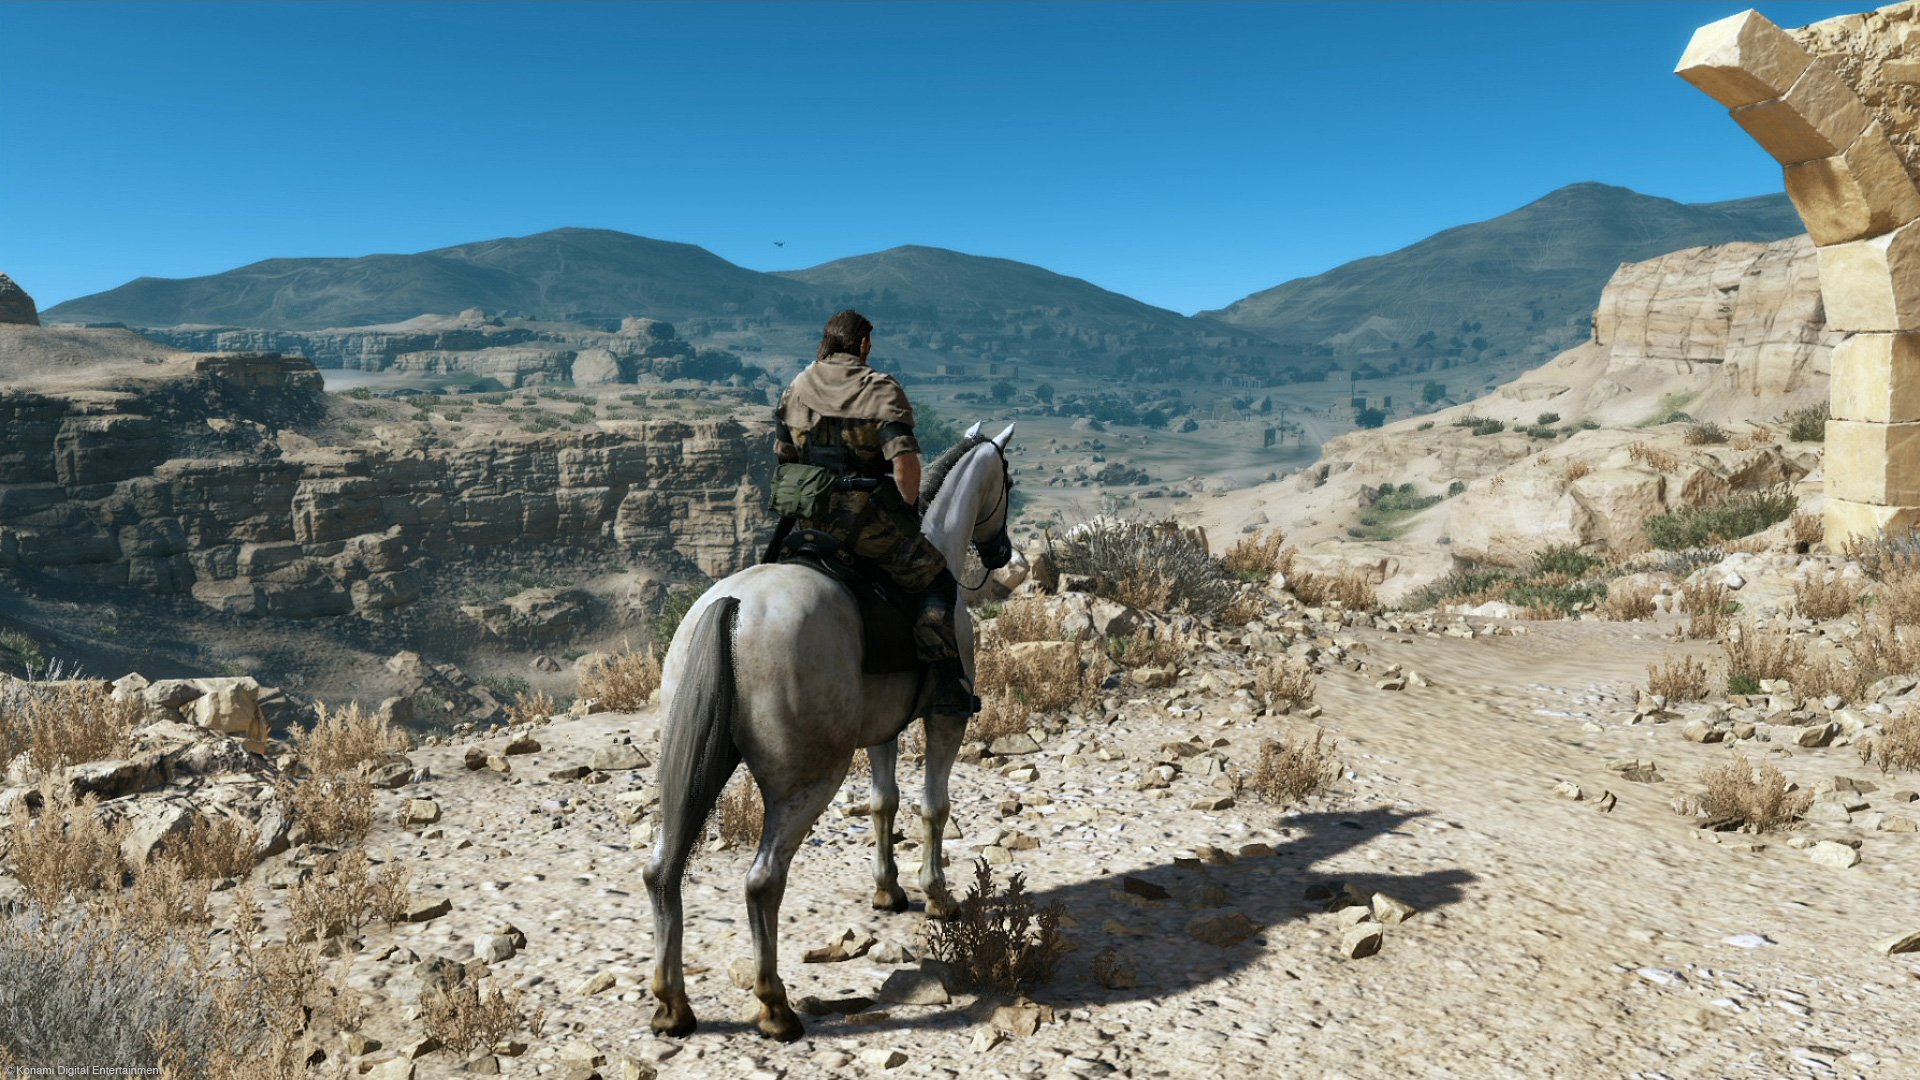 Metal Gear Solid V (5): The Phantom Pain – Day One Edition